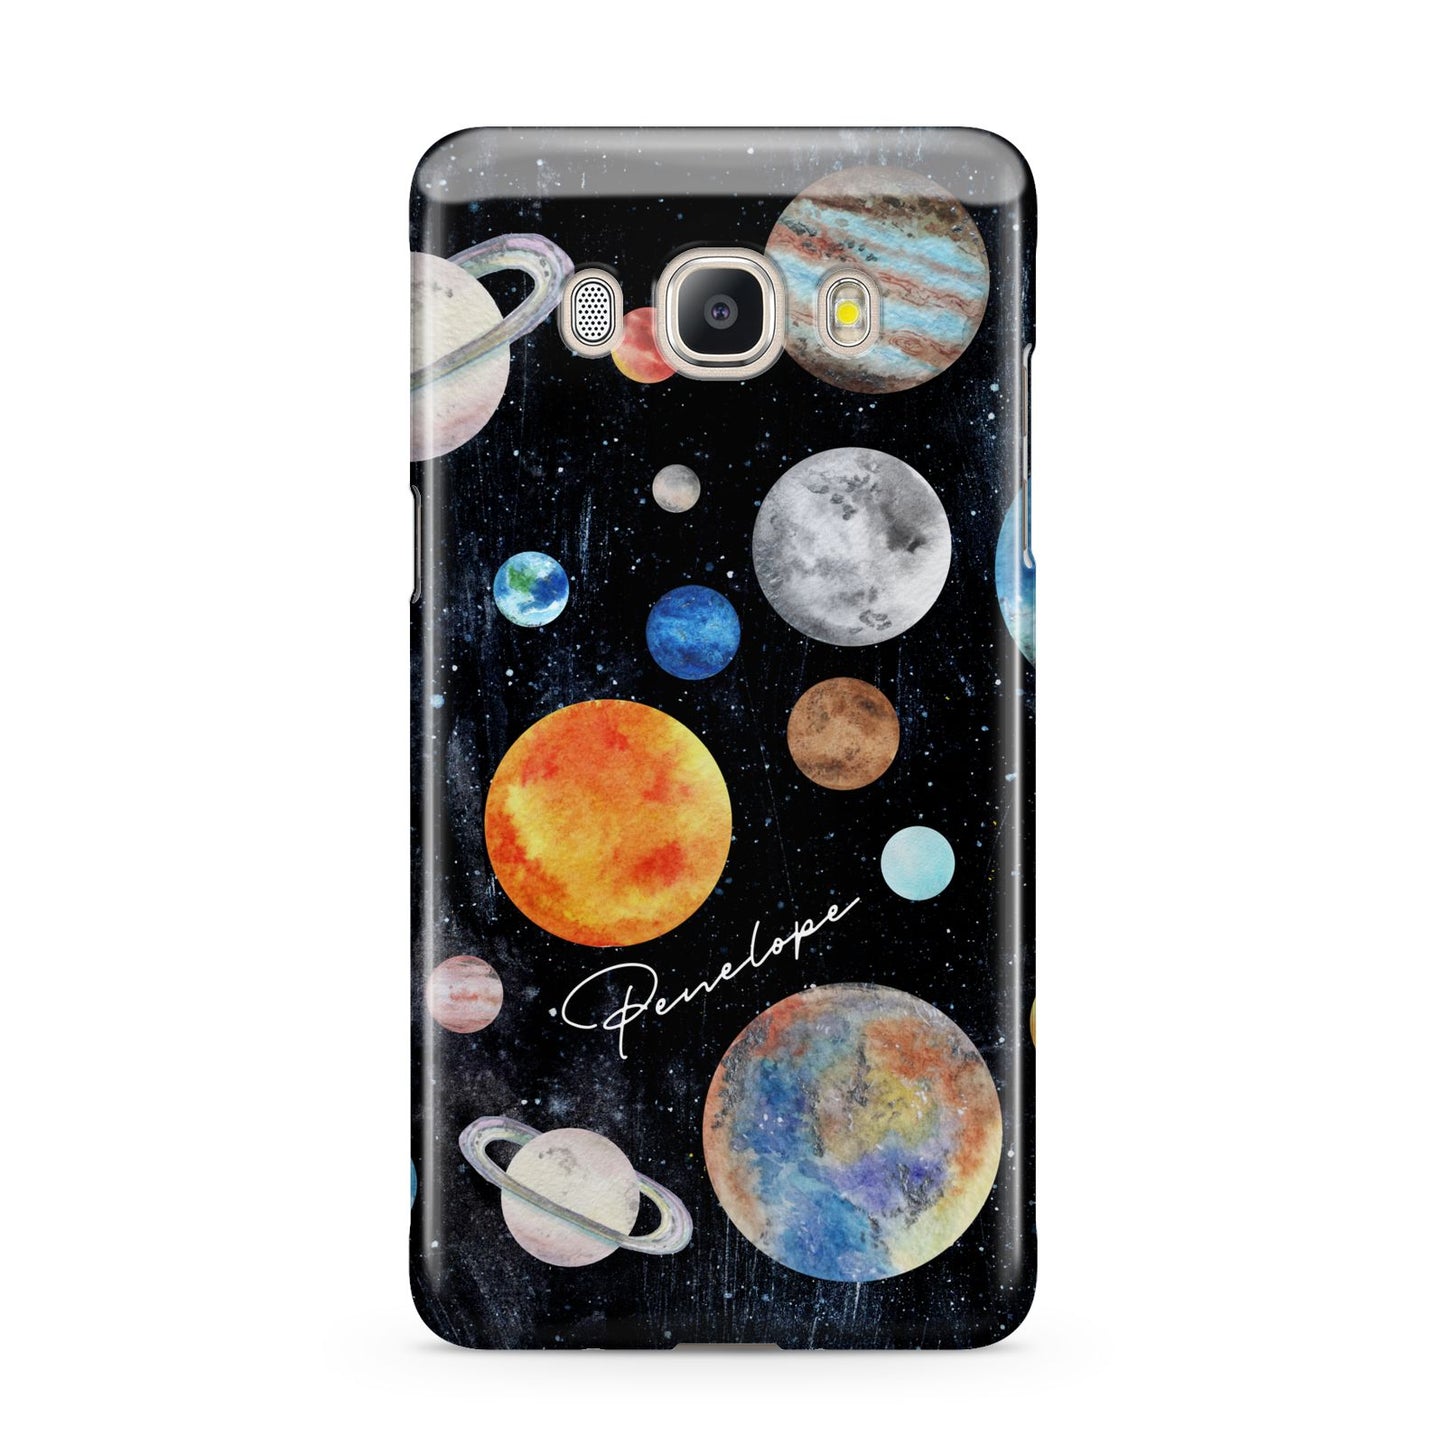 Personalised Planets Samsung Galaxy J5 2016 Case